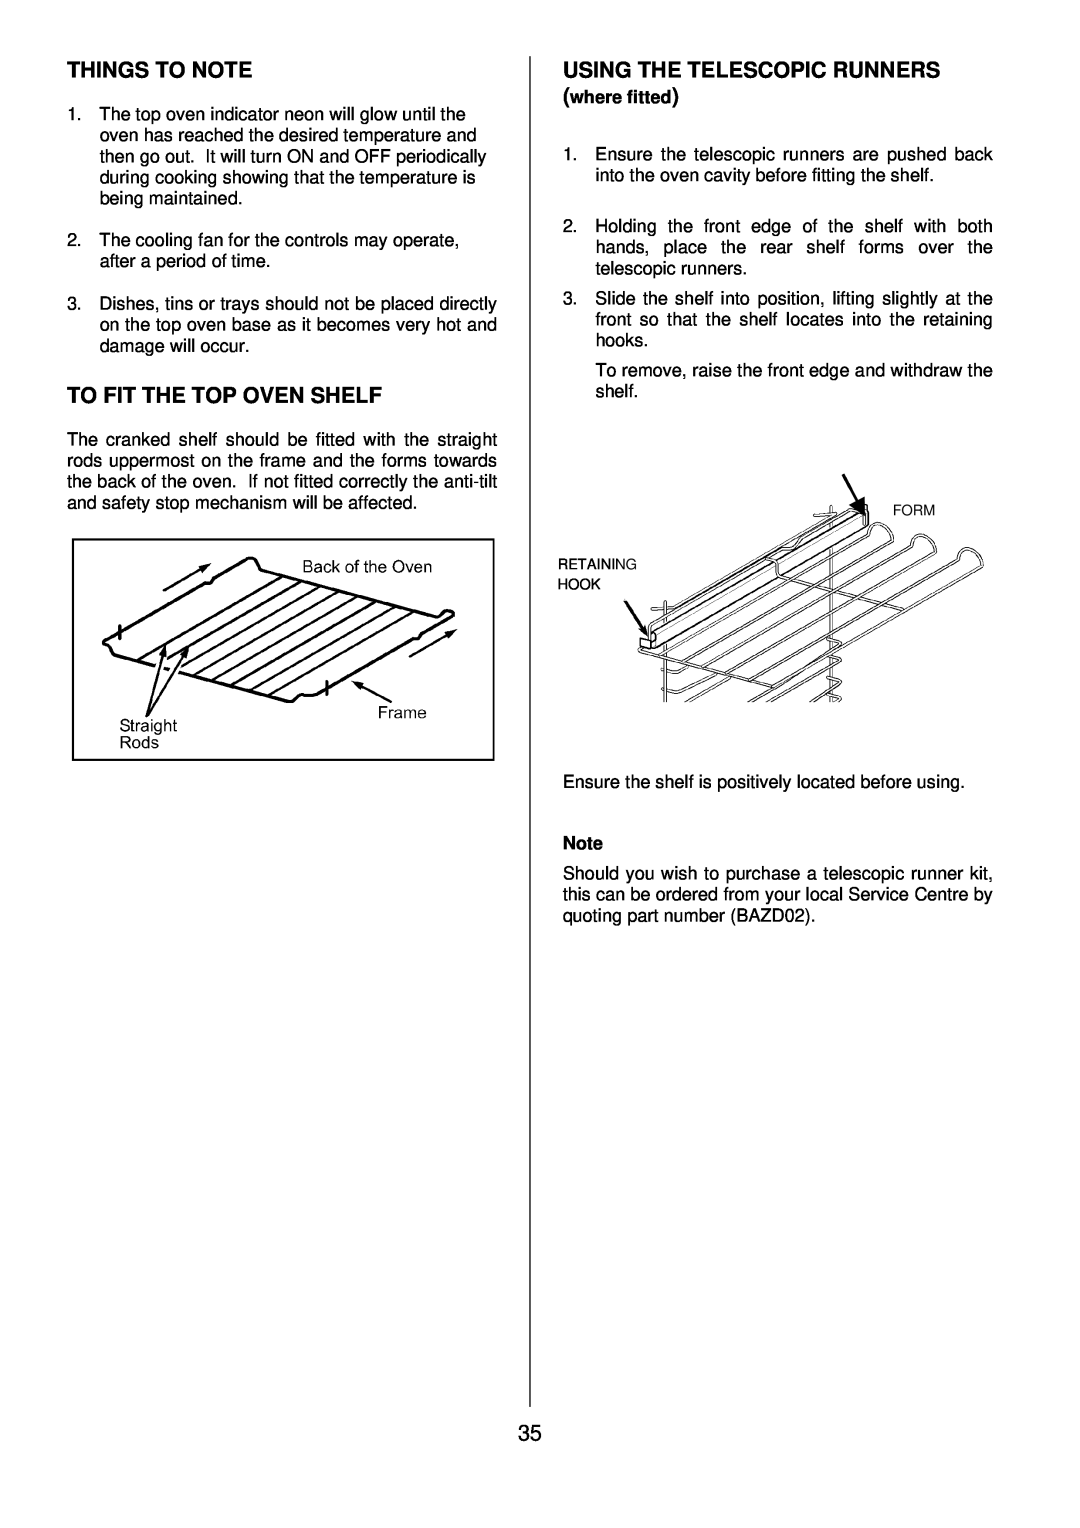 Zanussi ZDQ 895 manual To Fit The Top Oven Shelf, Using The Telescopic Runners, where fitted, Things To Note 